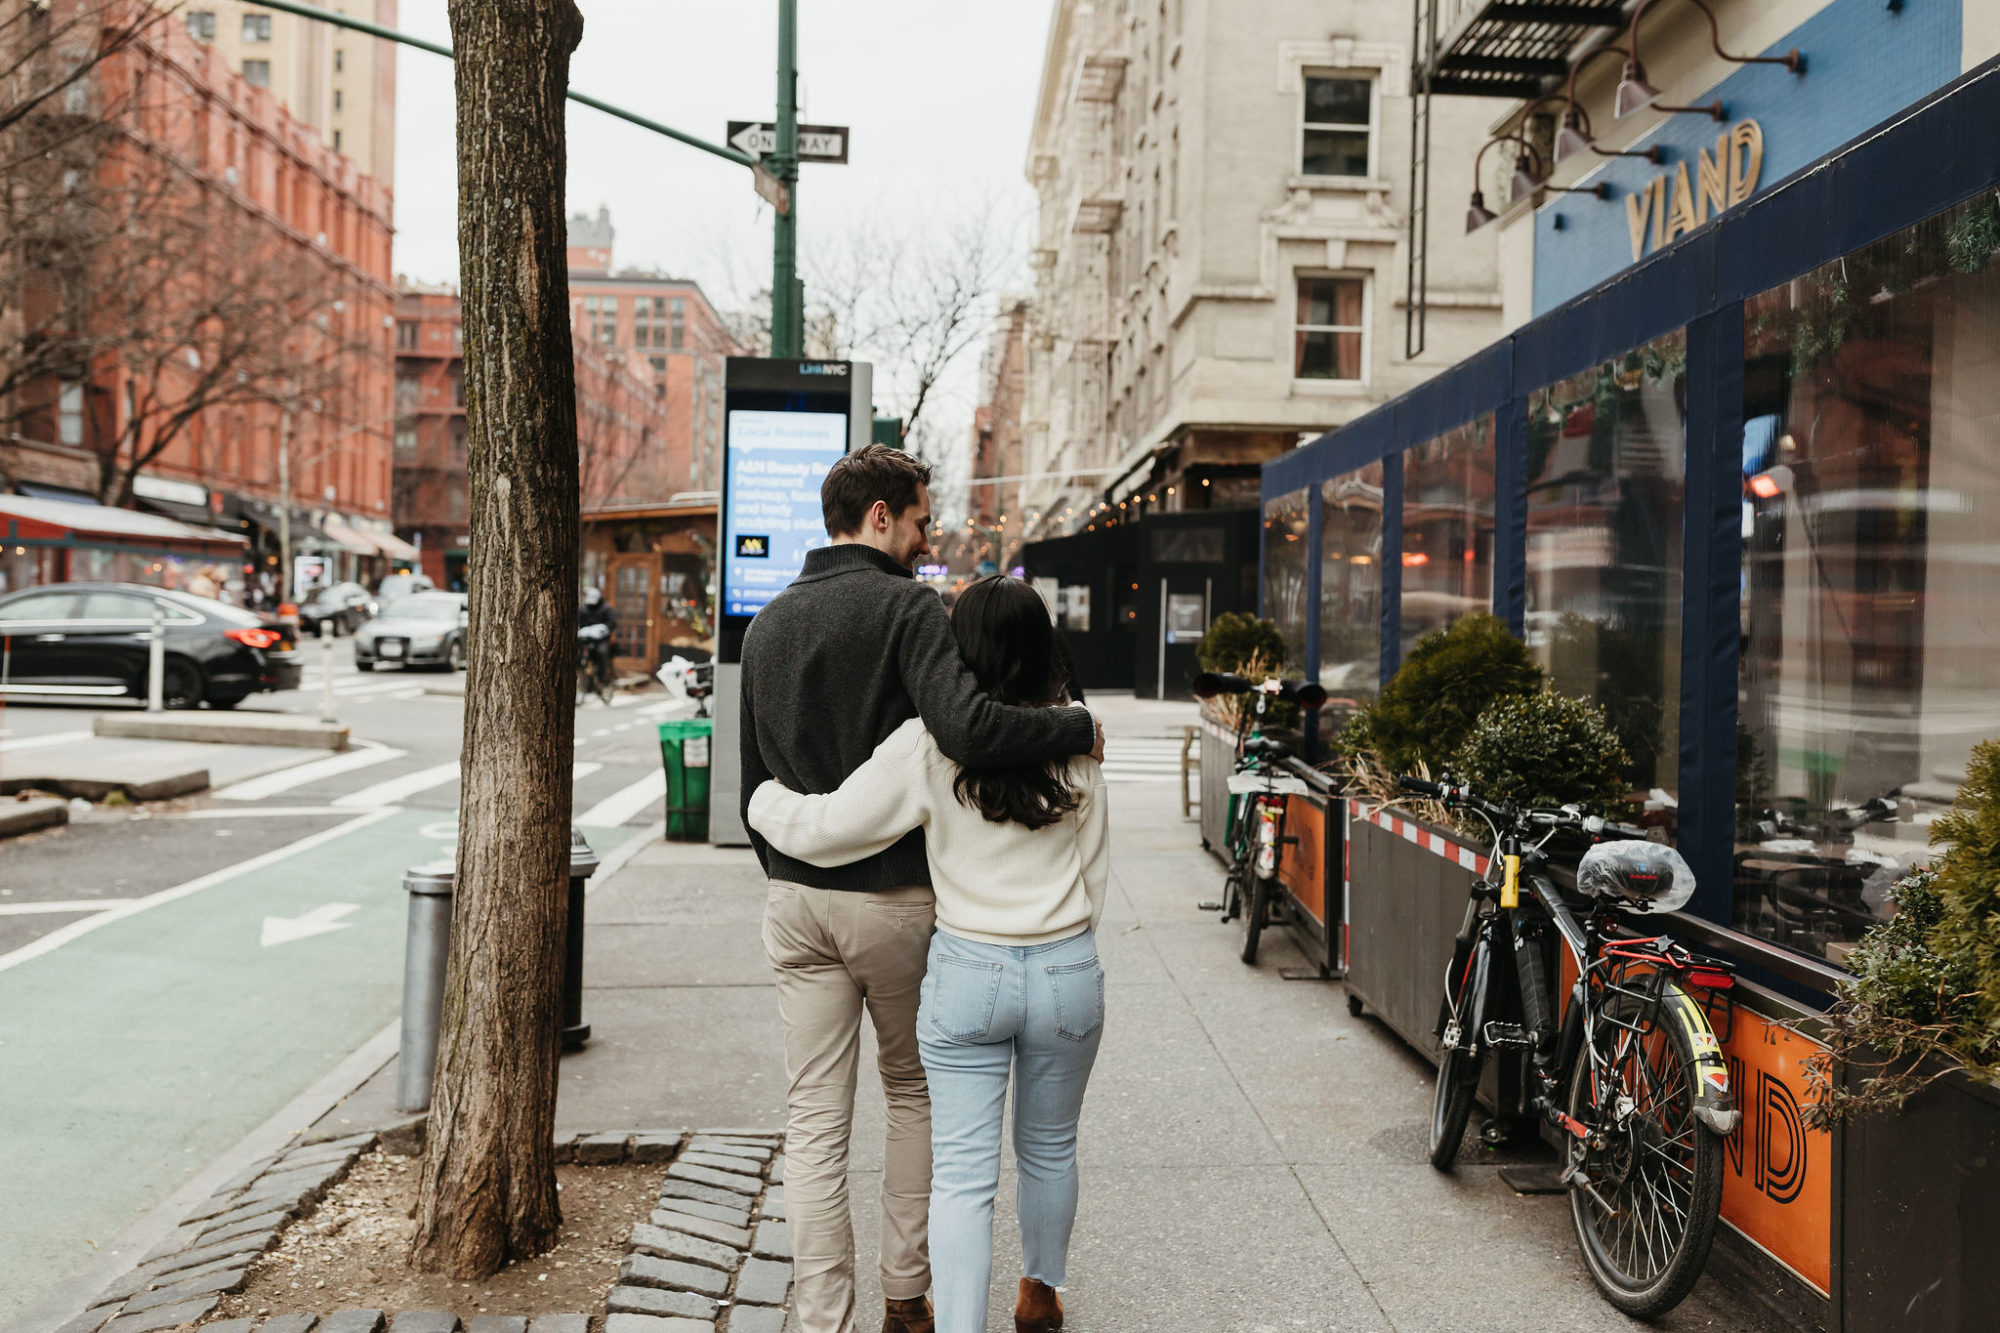 city engagement, urban photography, couples portraits, New York CIty Engagement session, street engagement photos, casual engagement photos, urban engagement photos, brownstone photoshoot, hudson valley wedding photographer, wedding photographer, 